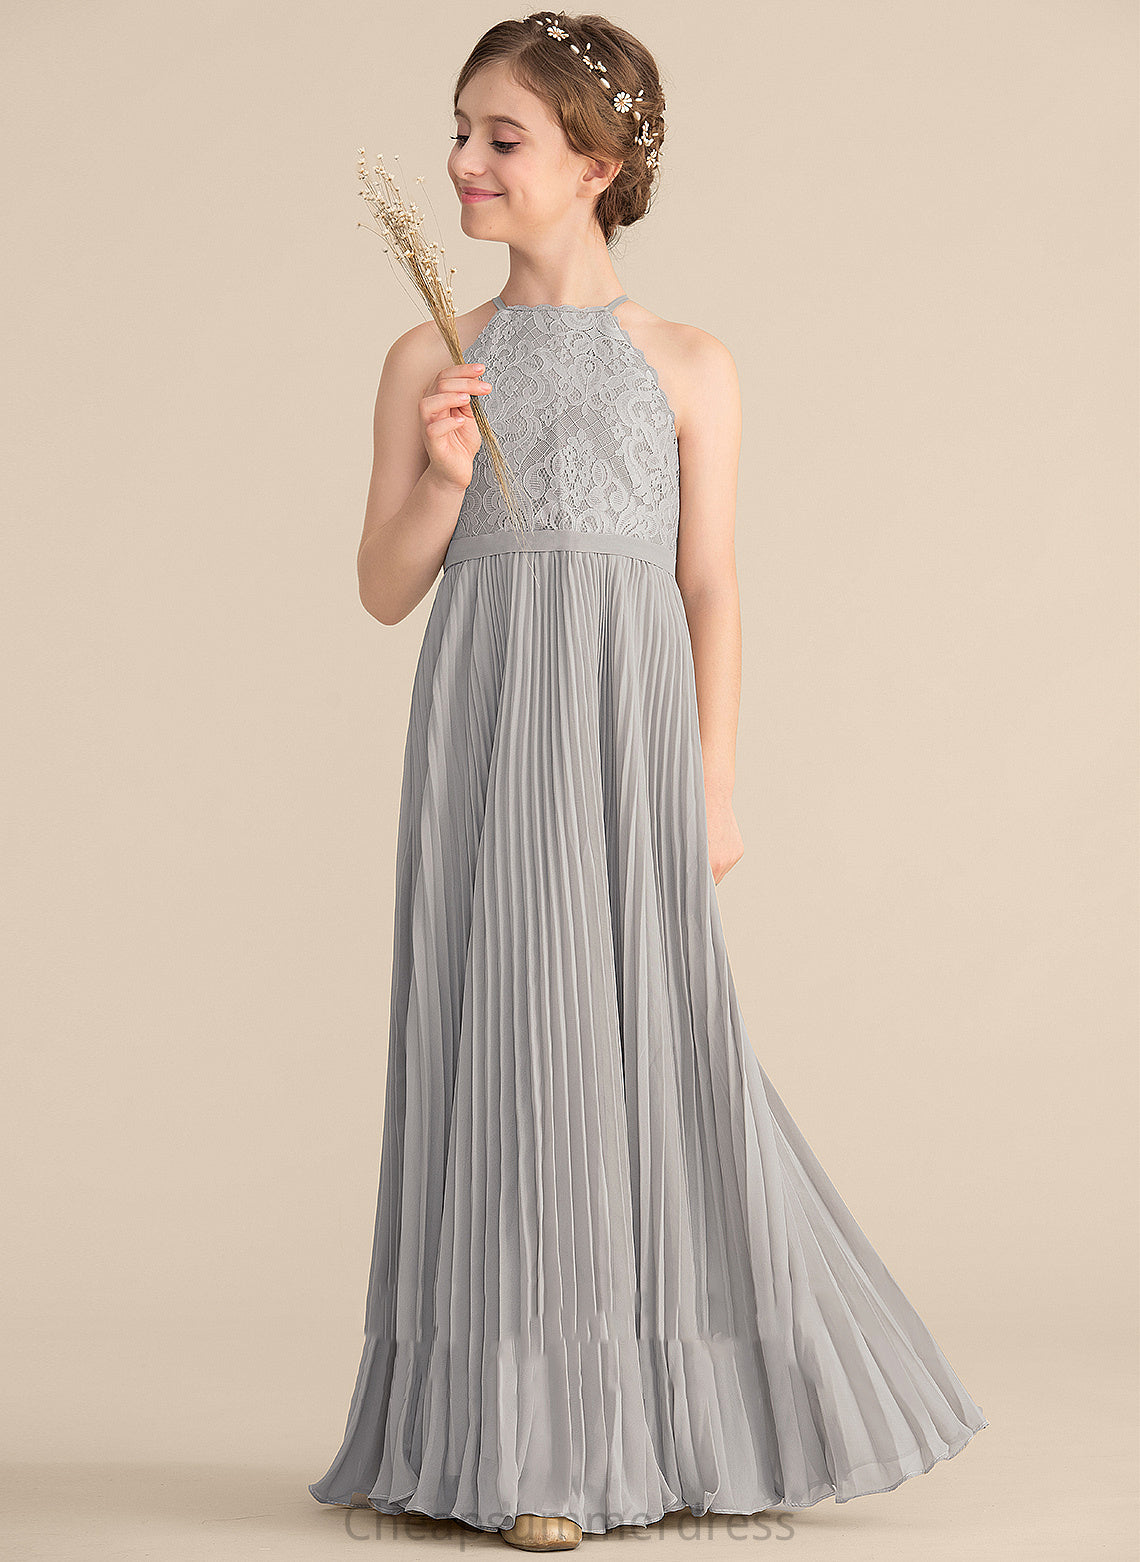 Pleated Lace With A-Line Junior Bridesmaid Dresses Chiffon Neck Anya Scoop Floor-Length